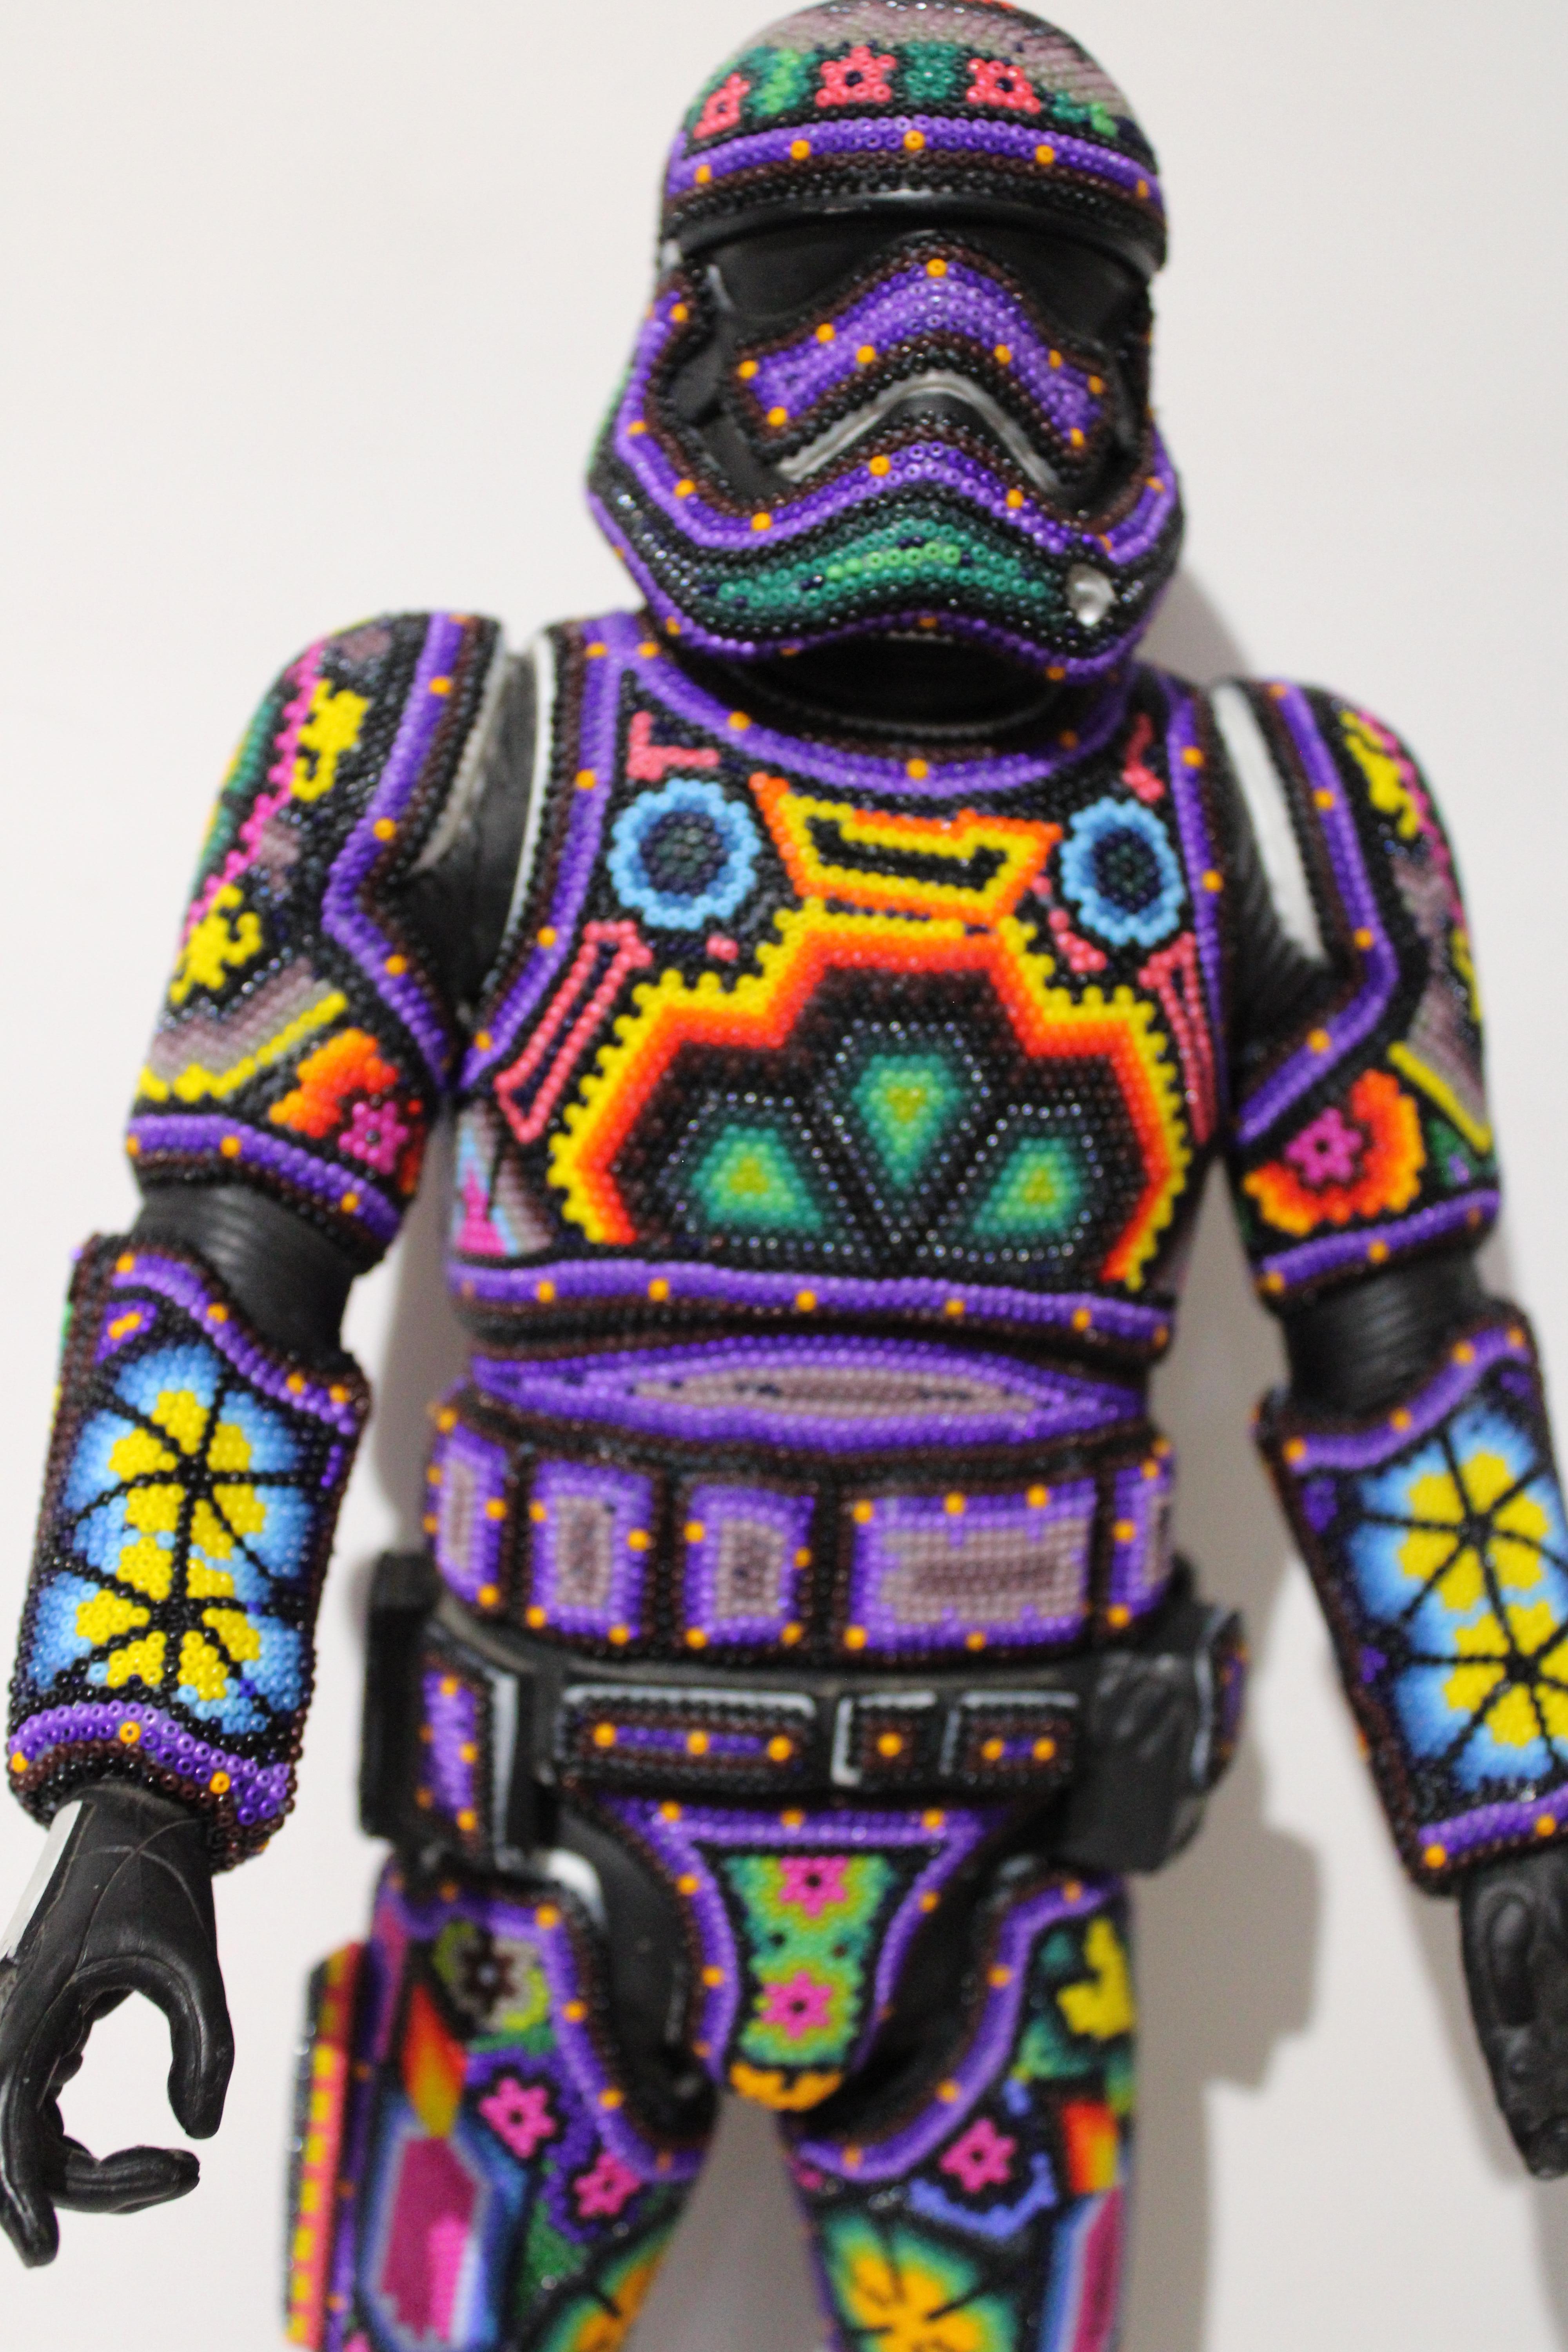 CHROMA aka Rick Wolfryd  Abstract Sculpture - "Stormtrooper" from Huichol ALTERATIONS Series